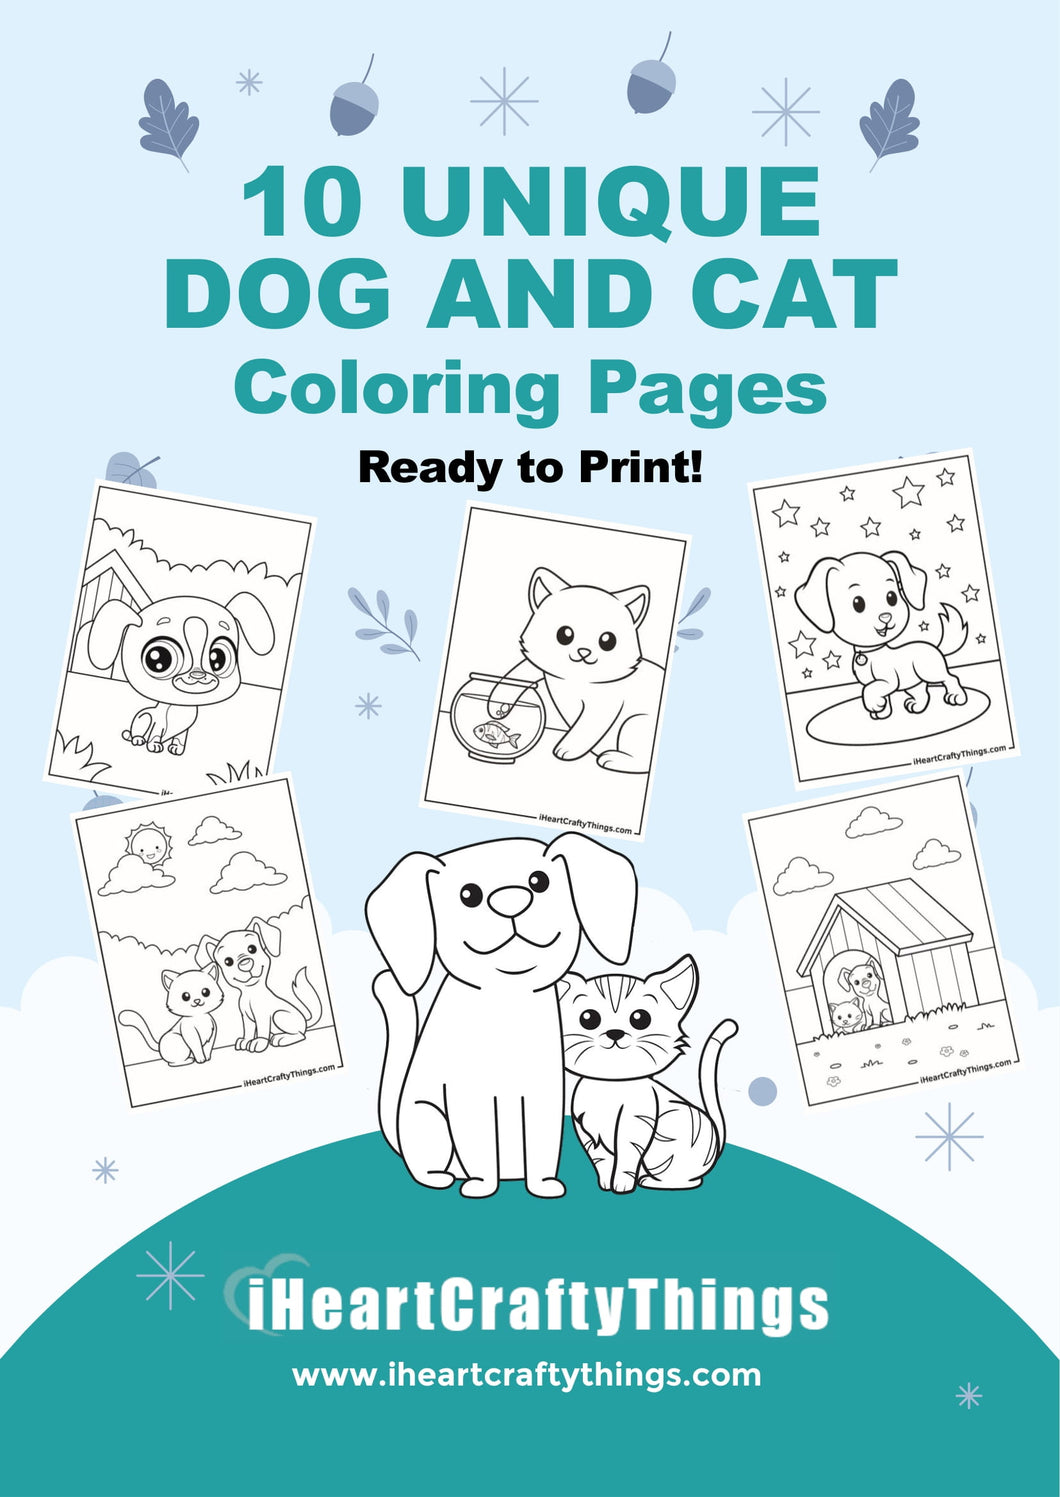 10 CAT AND DOG COLORING PAGES